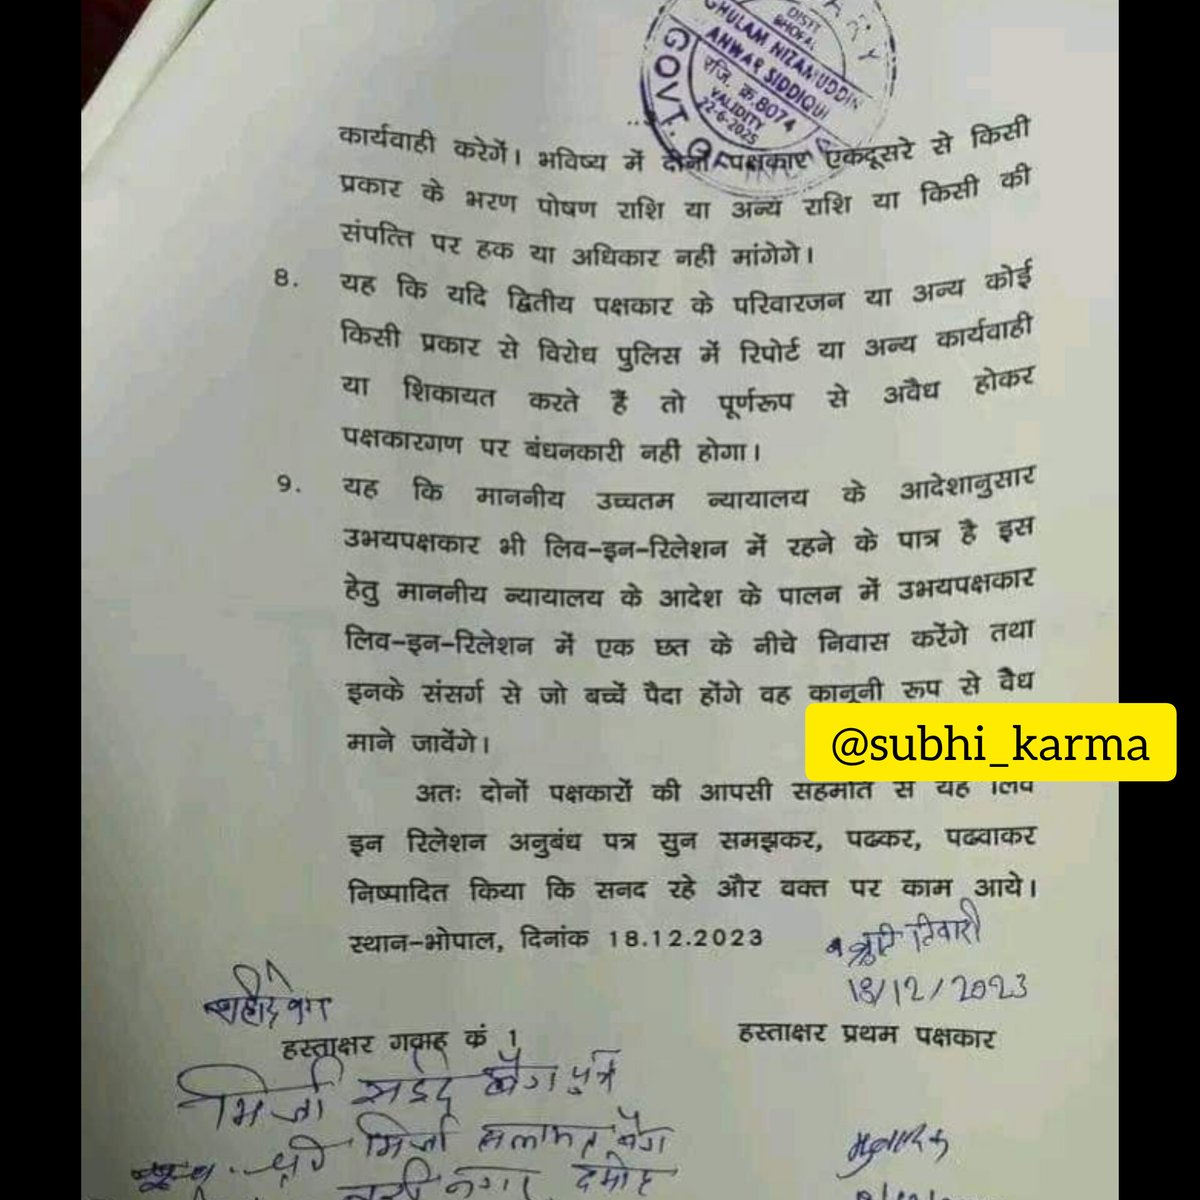 Damoh Shocker: 22-year-old Shruti Tiwari has signed an affidavit to live-in with 41-year-old Mubarak Khan. The document states if anything goes wrong in future she cannot register complaint against Mubarak. Also, if they wish to have marriage it will only be an Islamic wedding.